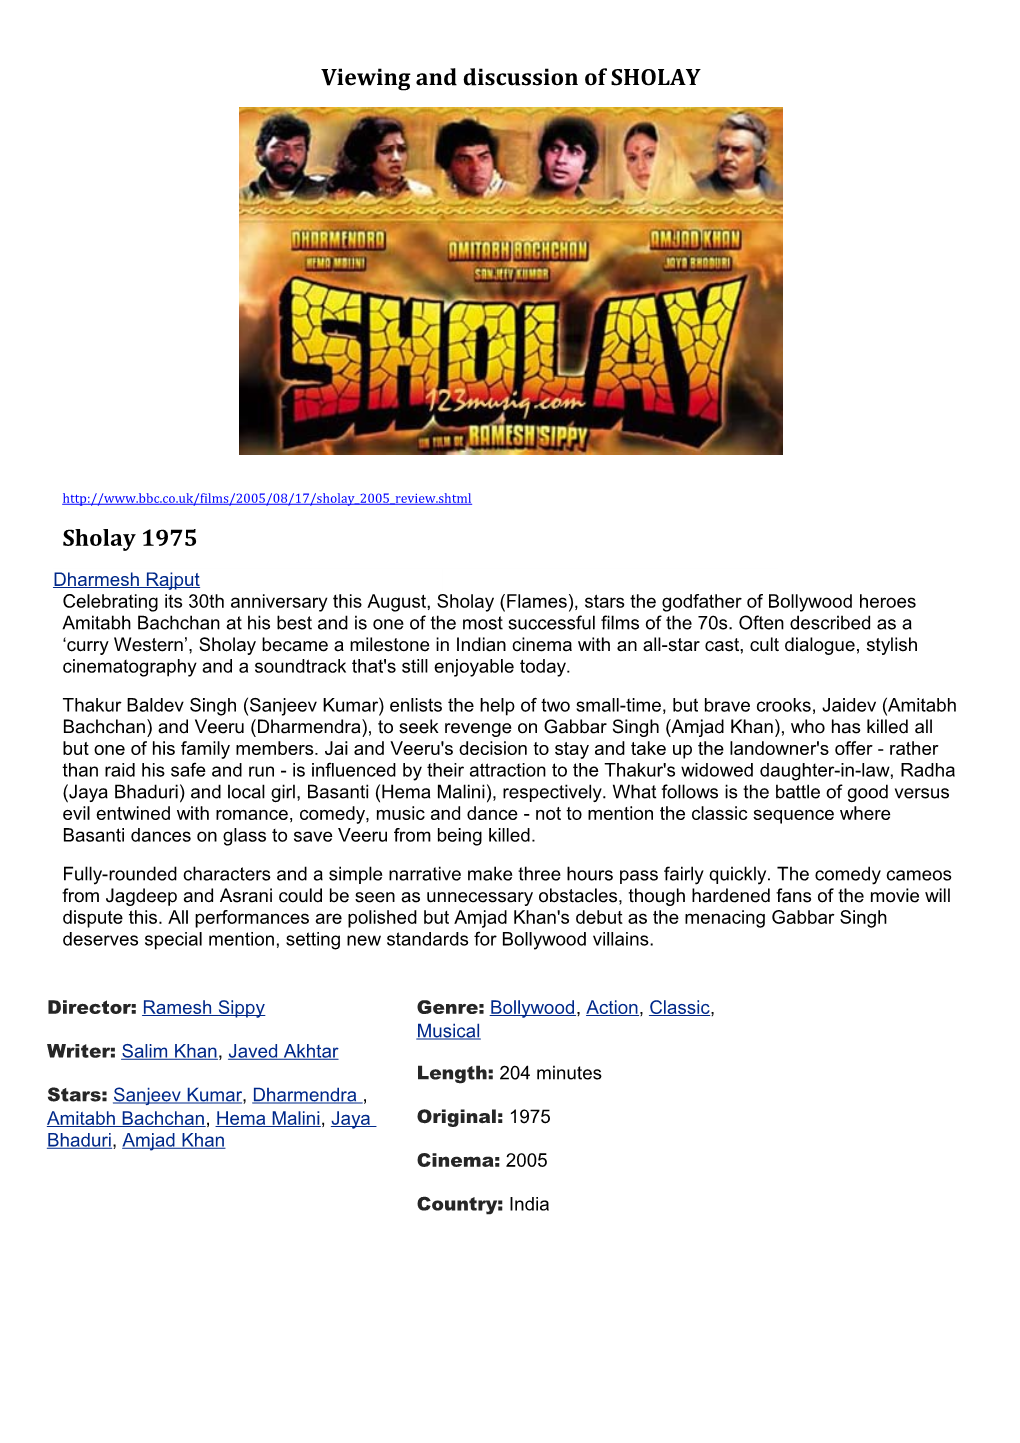 Viewing and Discussion of SHOLAY